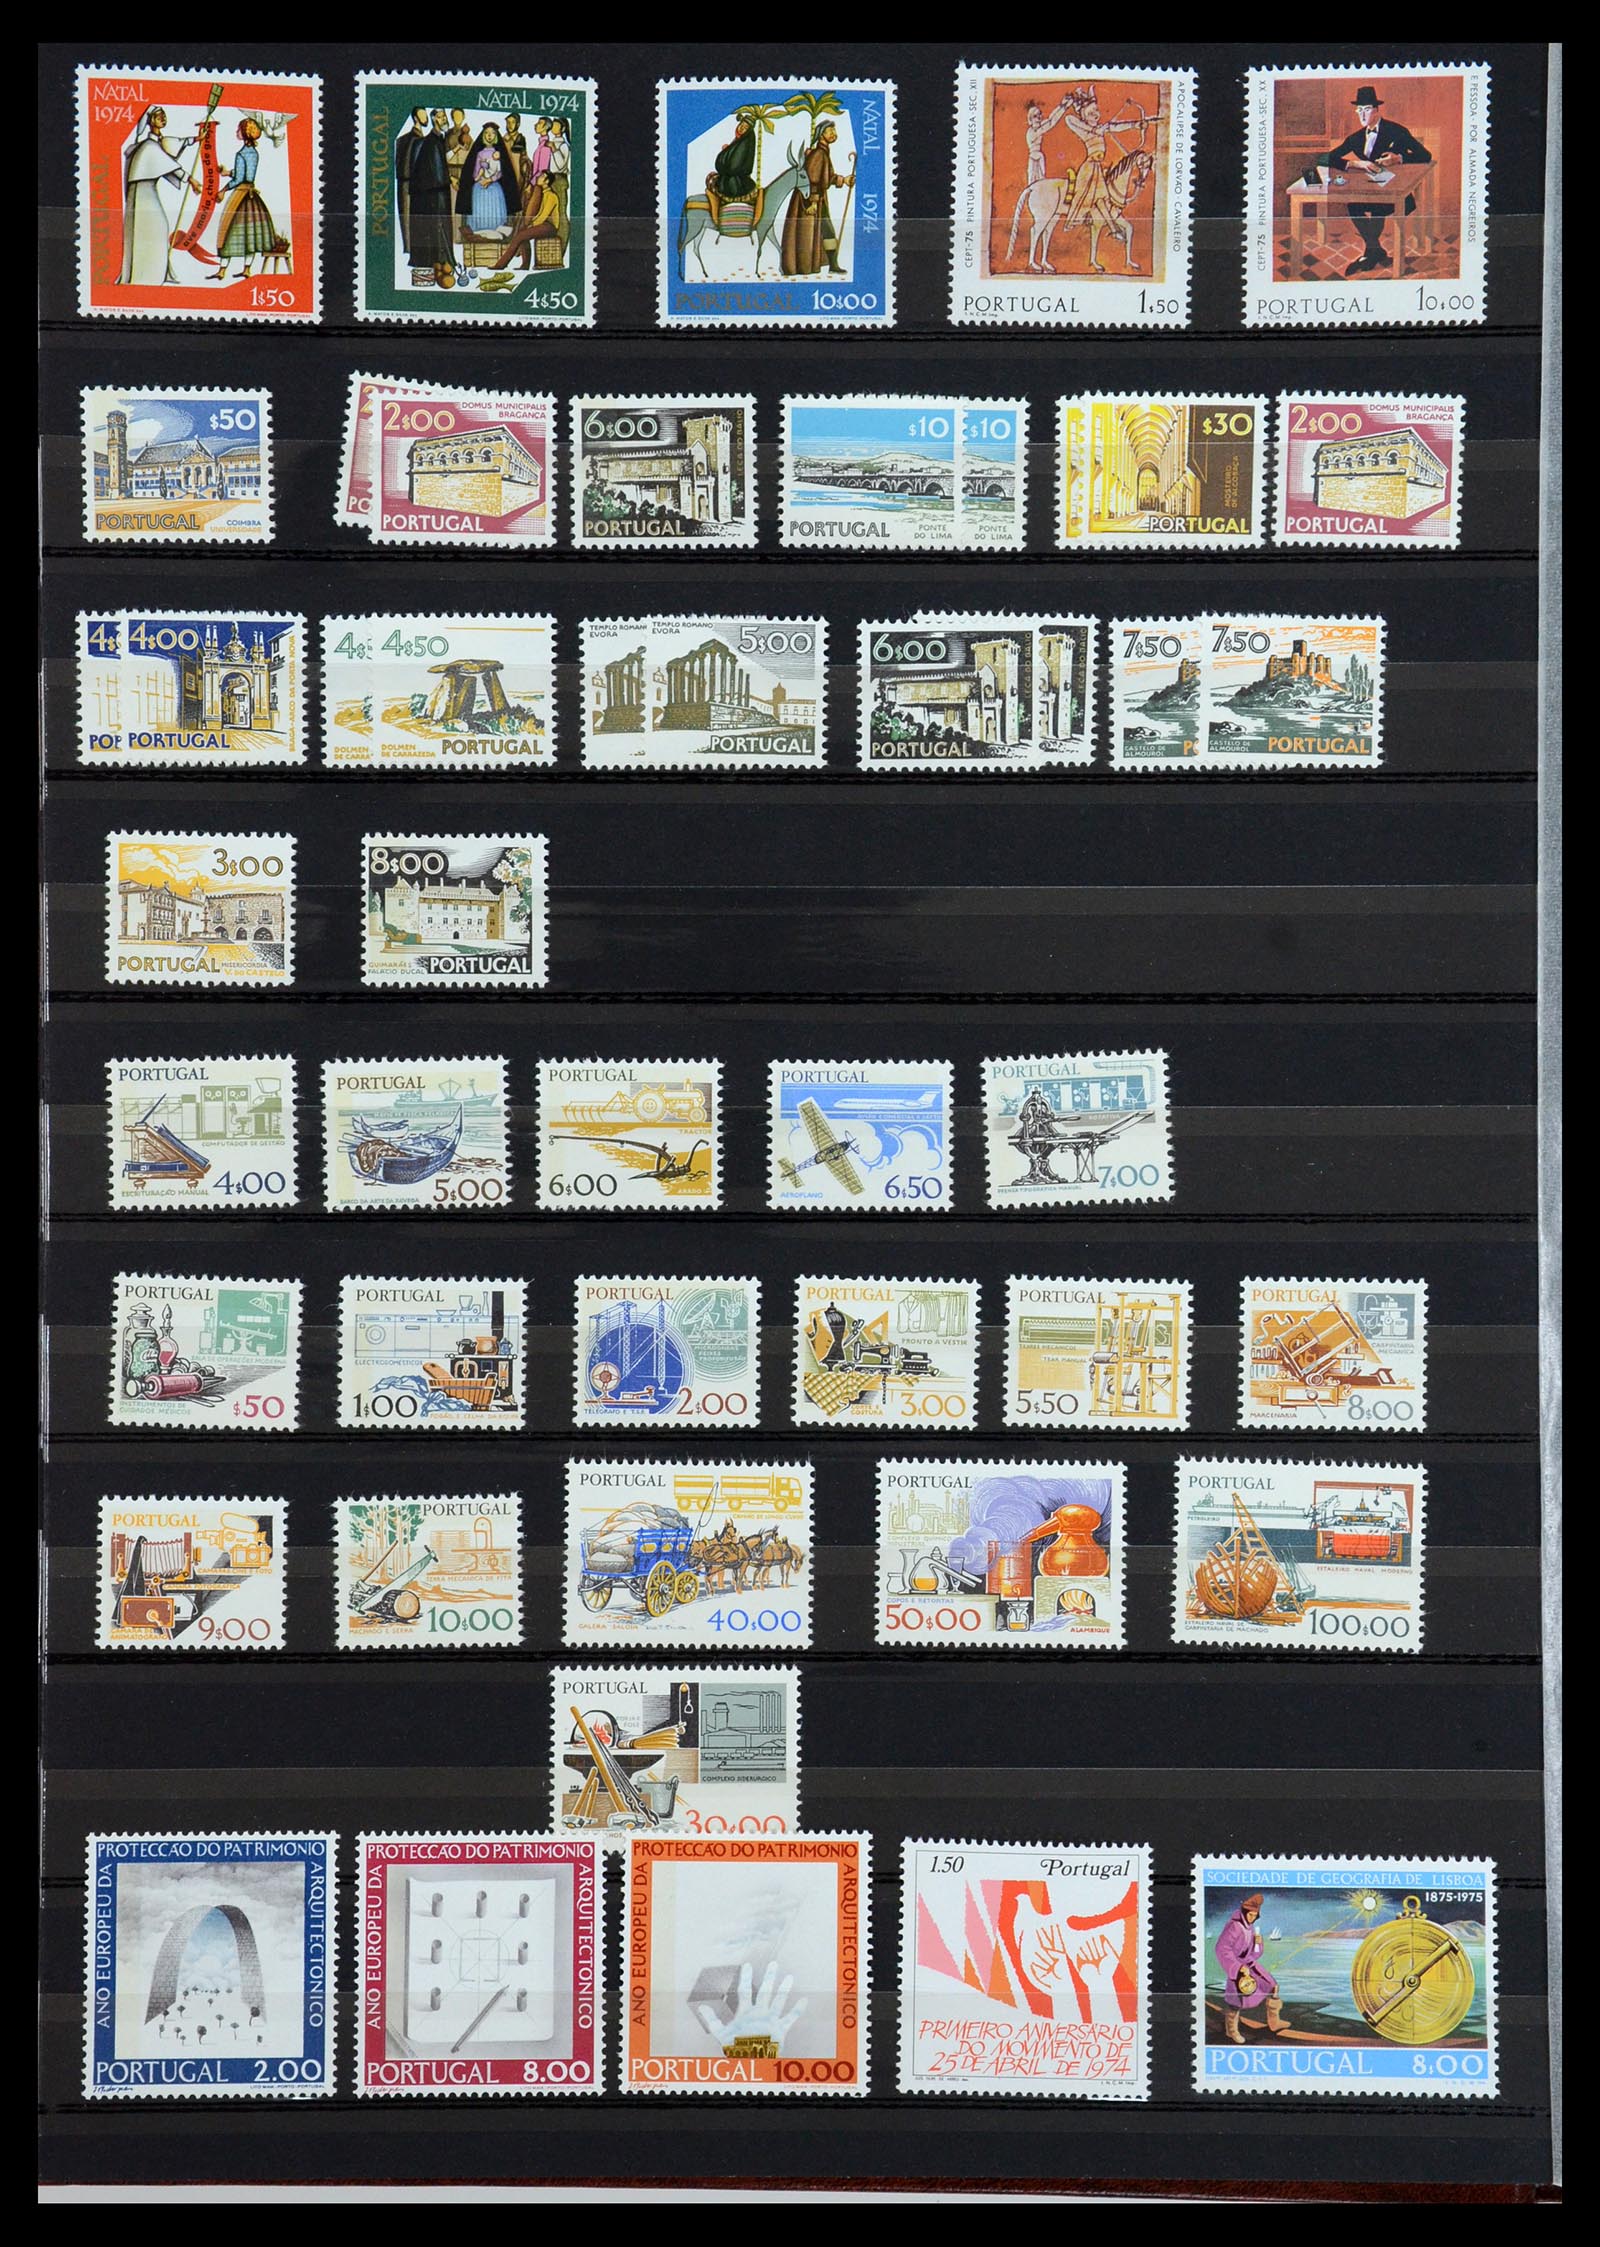 36263 102 - Stamp collection 36263 Western Europe 1960-1990.